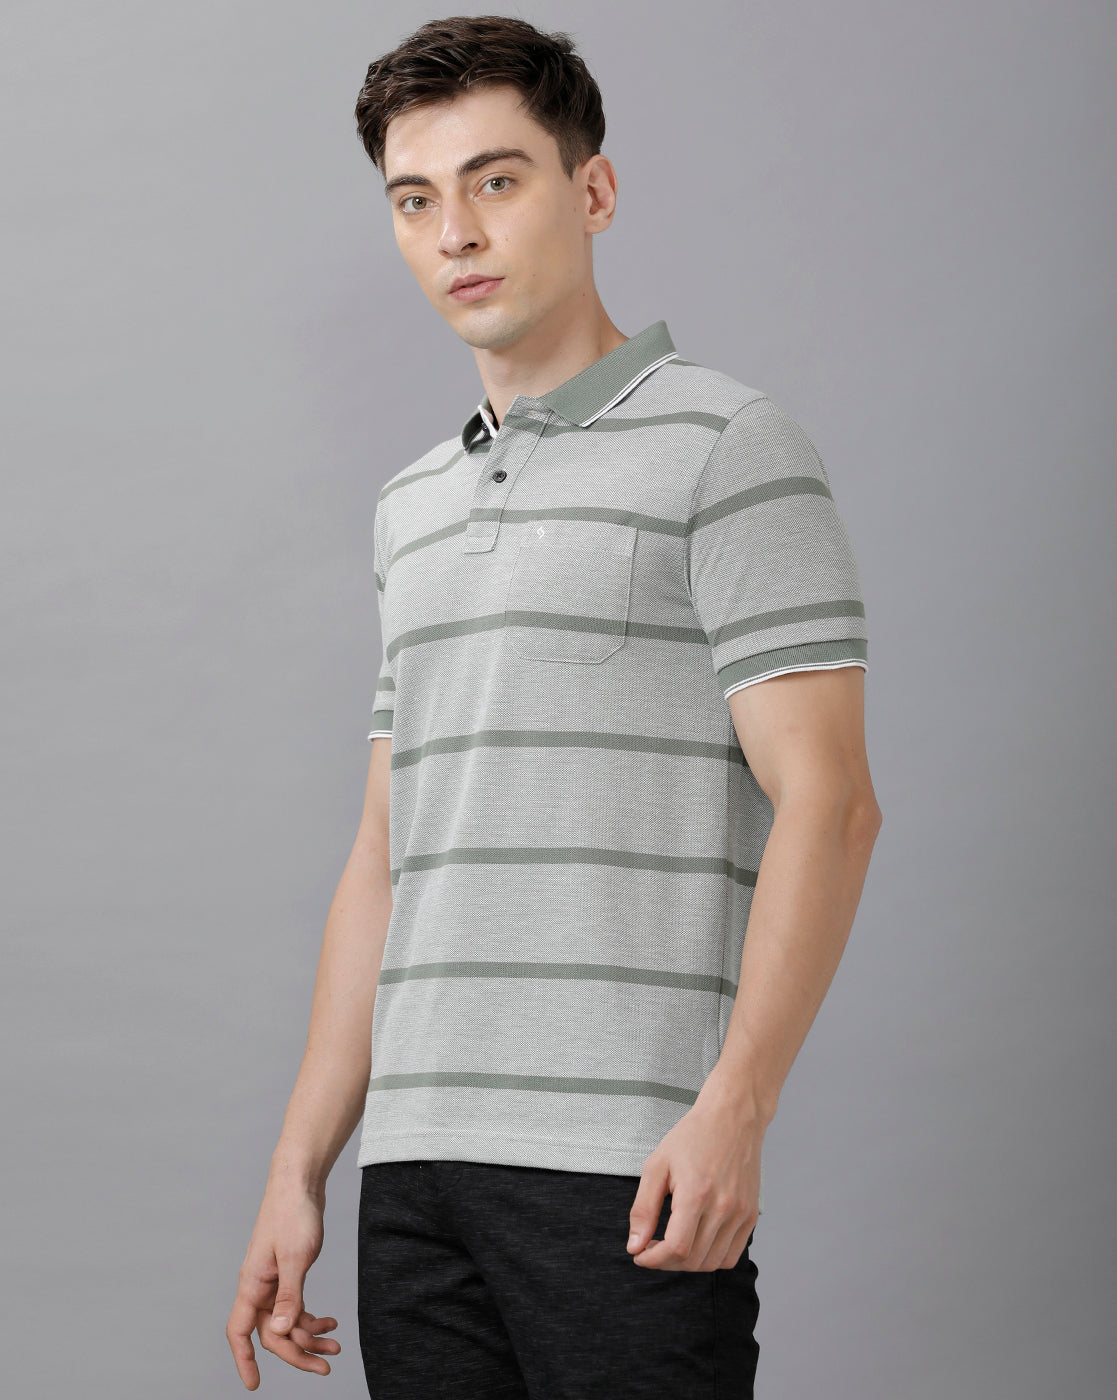 Classic Polo Mens Cotton Blend Striped Half Sleeve Slim Fit Polo Neck Grey Color T-Shirt | Adore 171 A